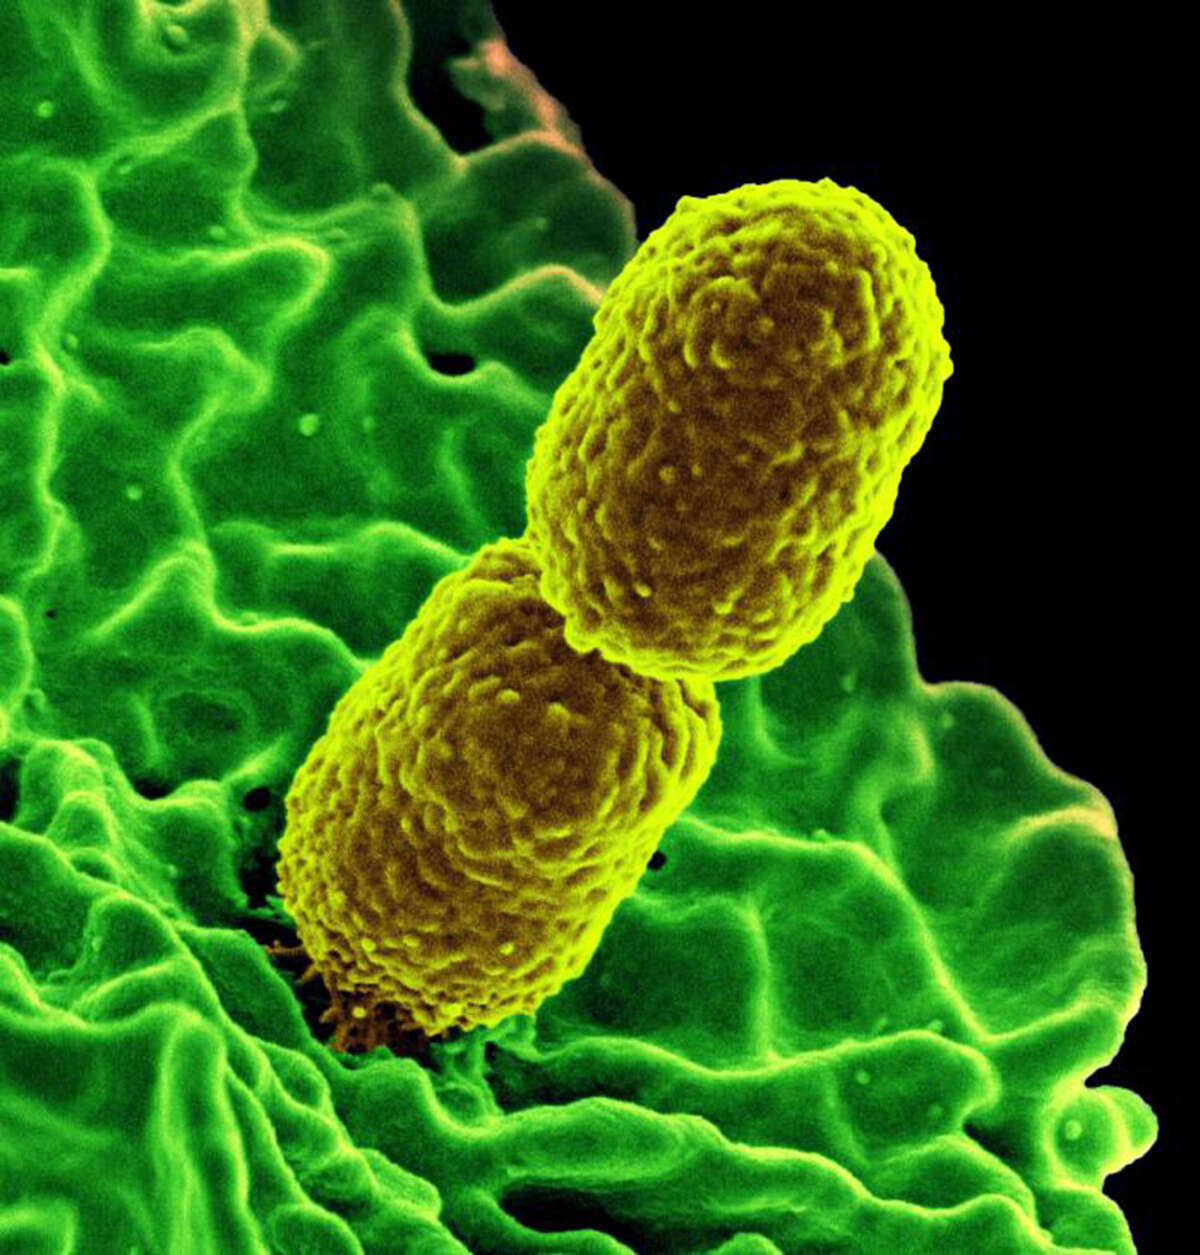 Two mustard-colored, rod-shaped carbapenem-resistant Klebsiella pneumonias bacteria are part of the family of germs known as Enterobacteriaceae. (Handout photo by National Institute of Allergy and Infectious Diseases)